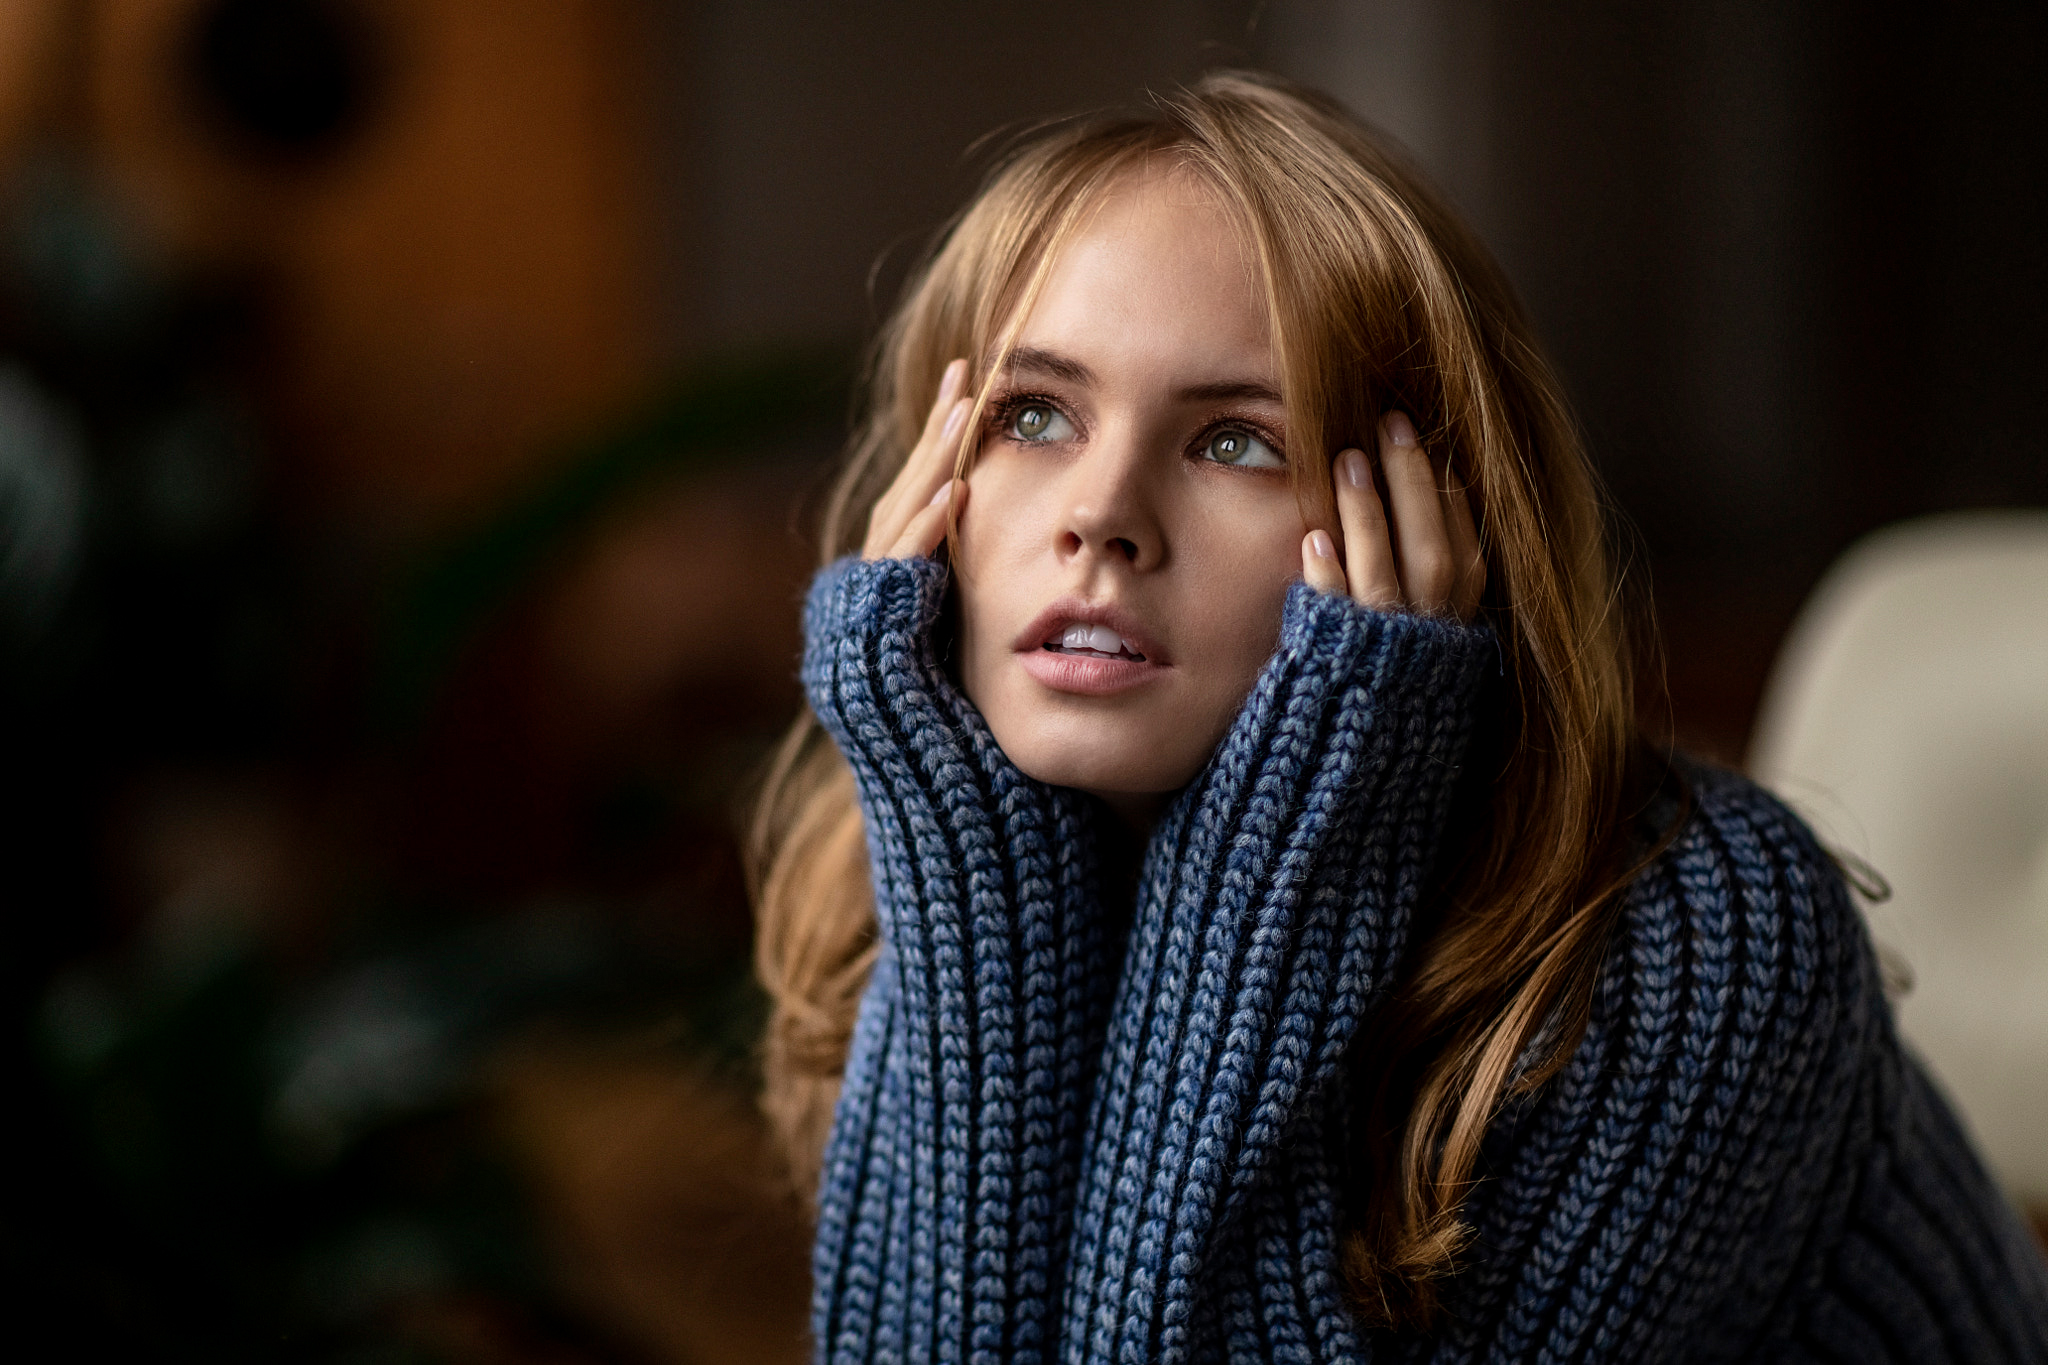 People 2048x1365 Anastasia Scheglova women blonde portrait blue sweater looking up green eyes hands on head open mouth long hair pale pink lipstick touching hair touching face